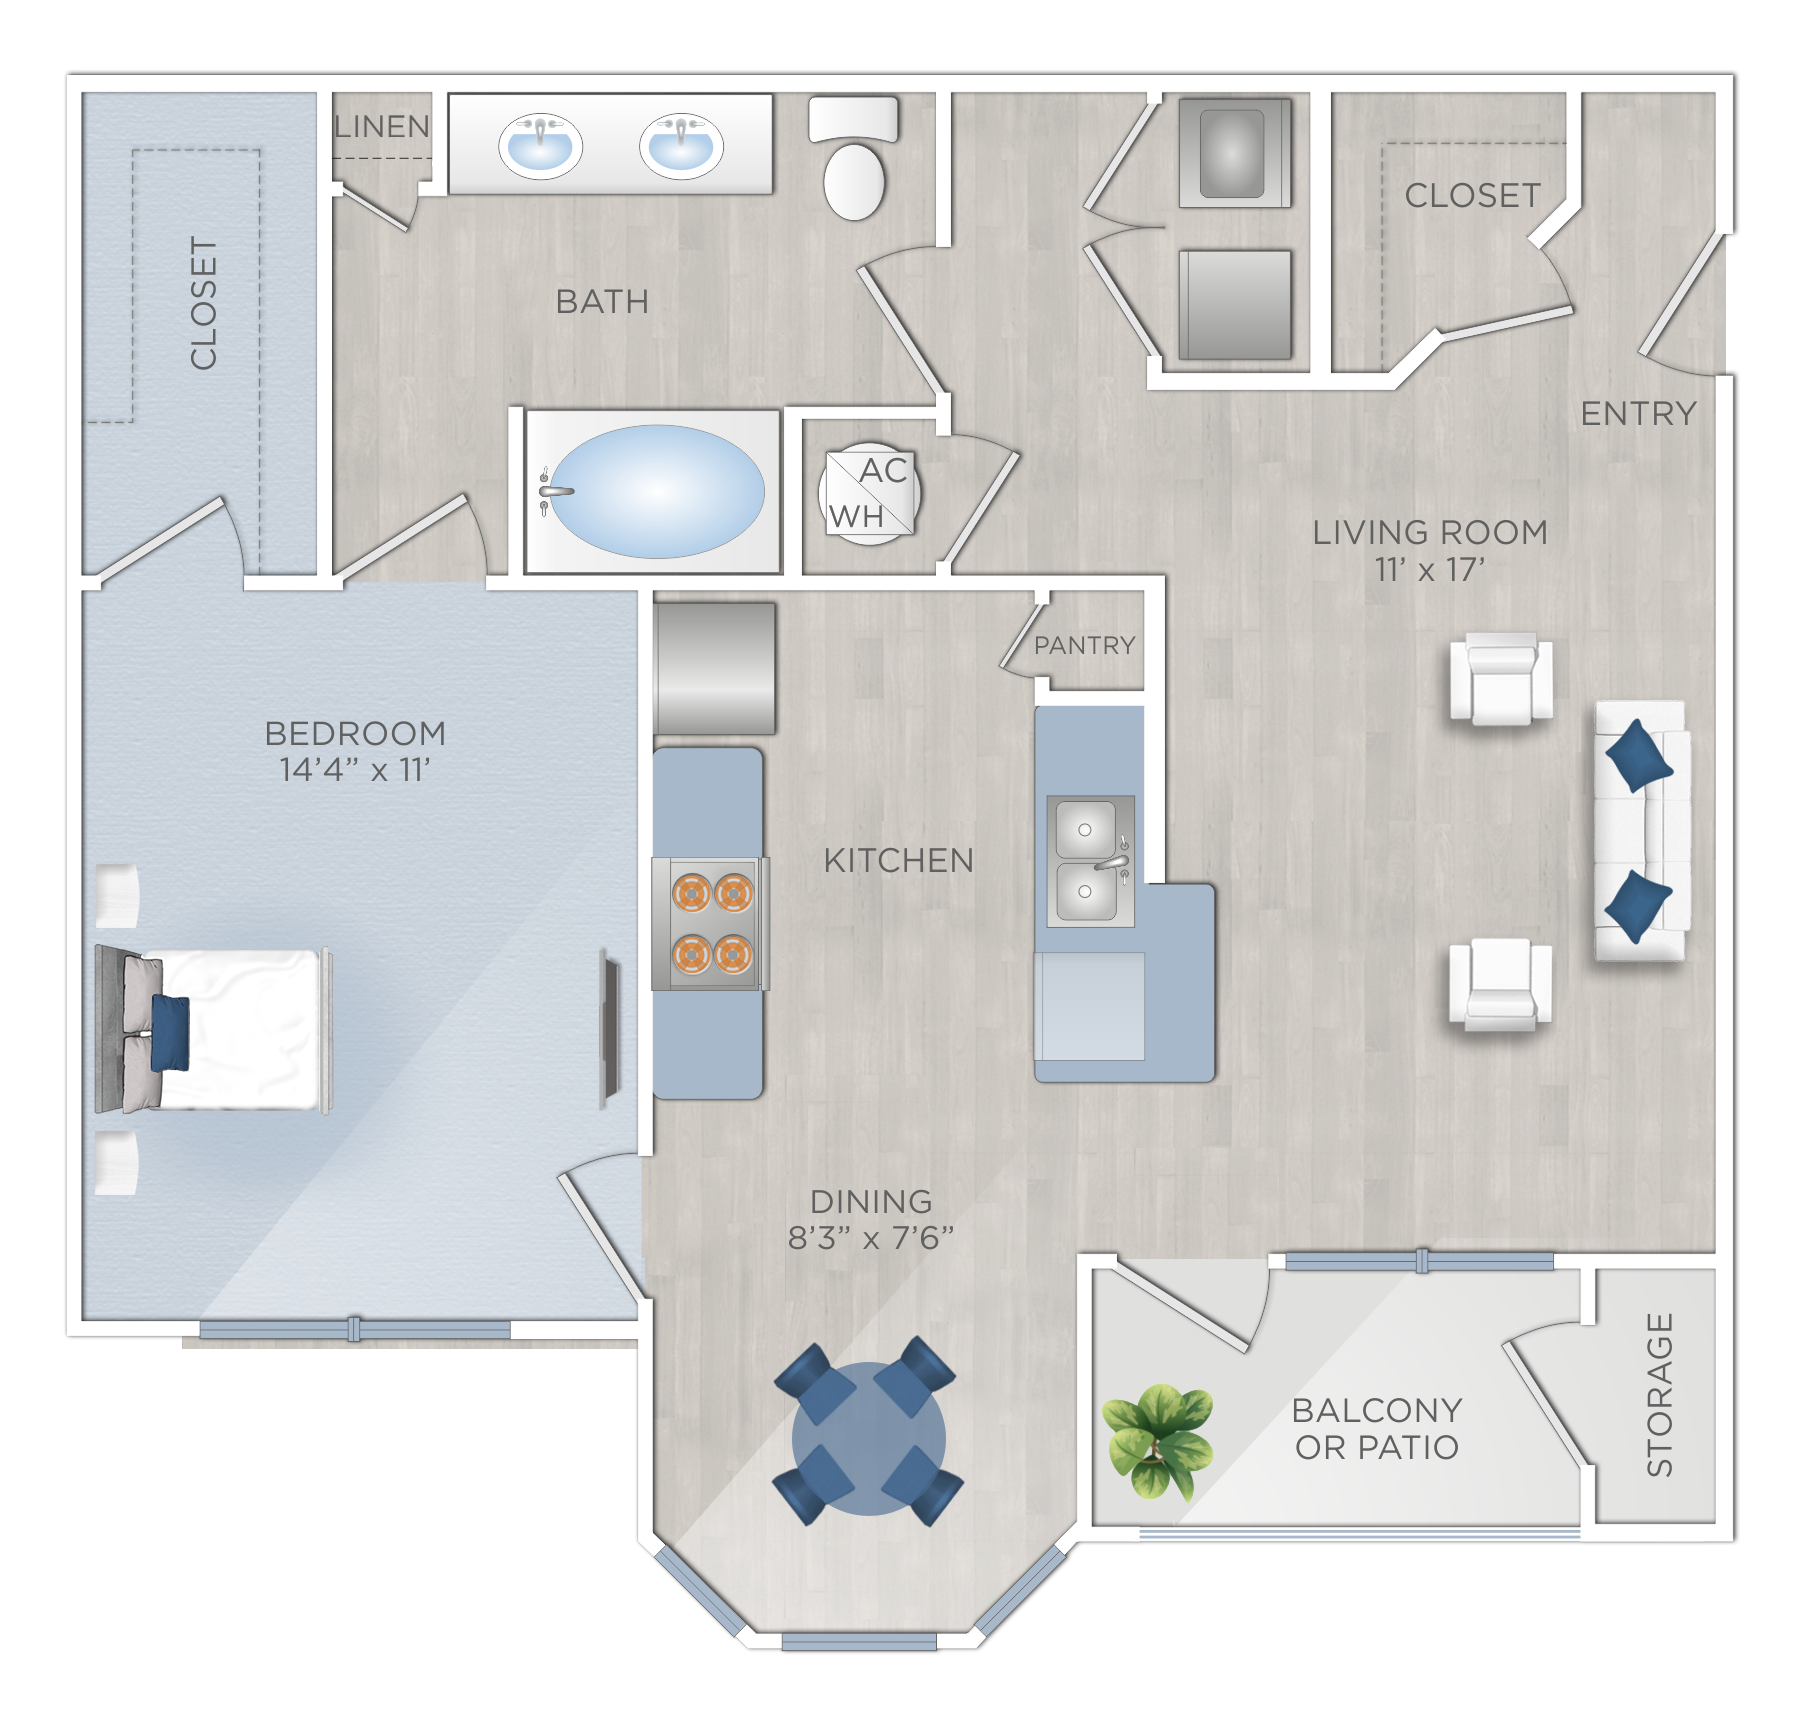 One Bedroom Apartments in Tomball, TX - The Preserve at Spring Creek - A3